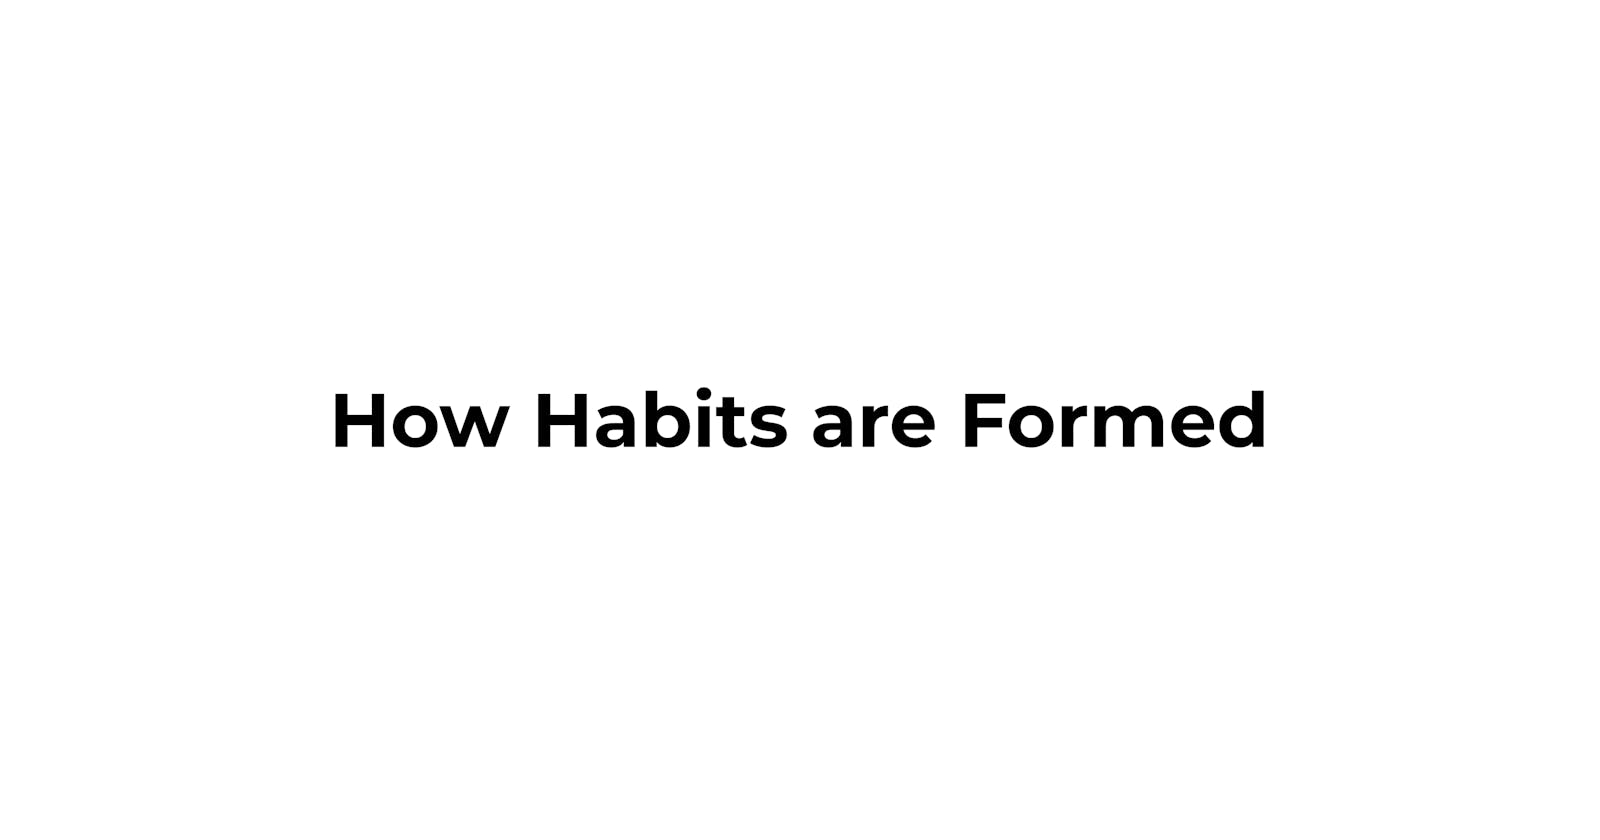 How to build habits